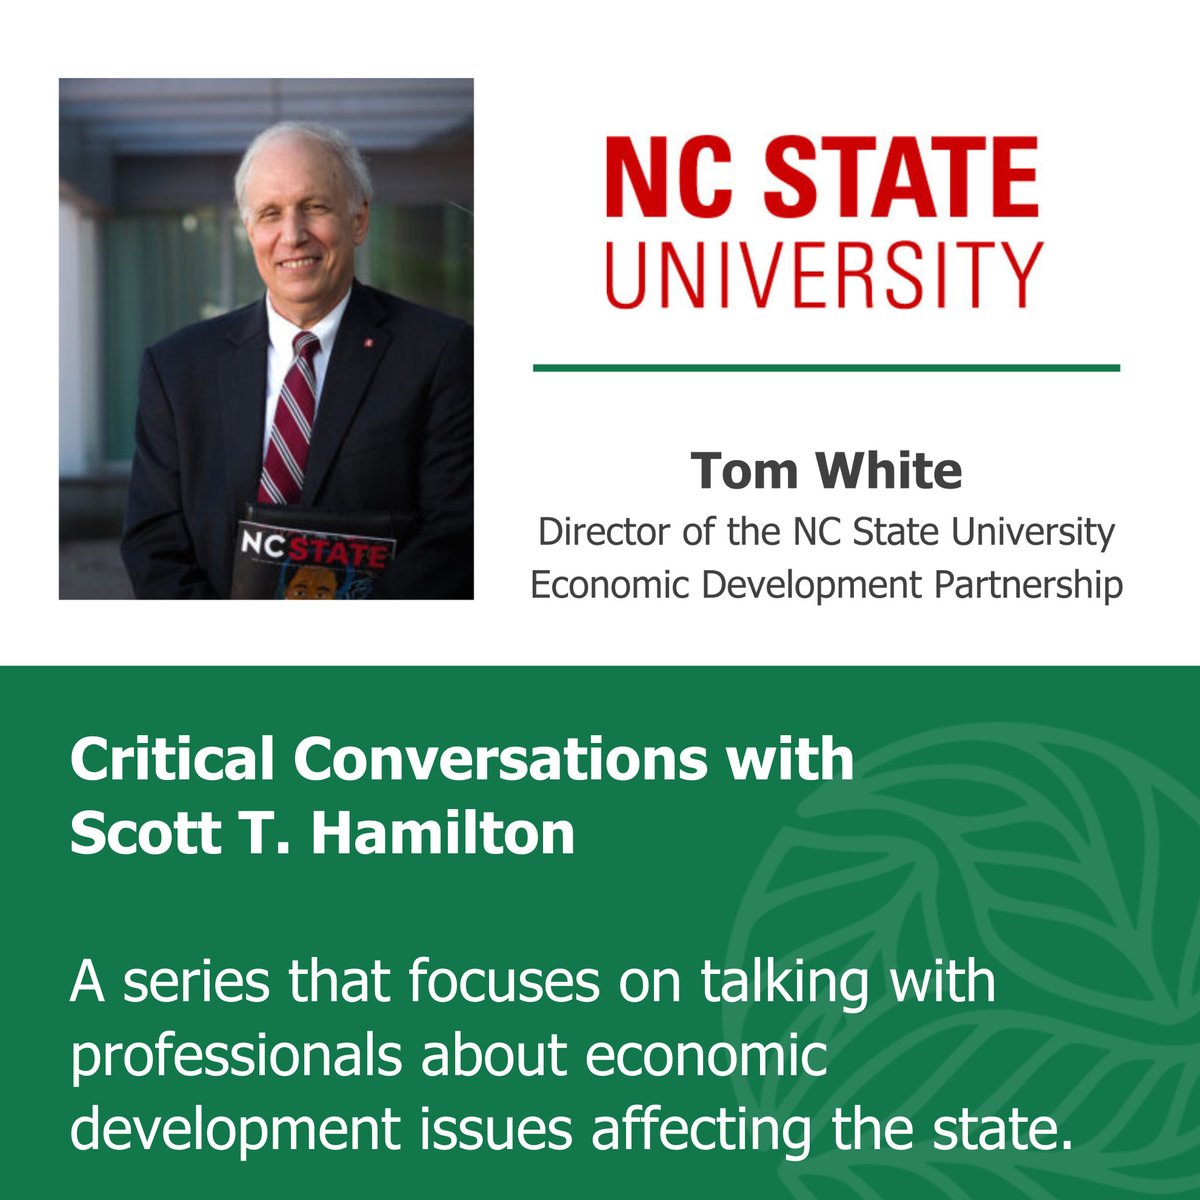 NC State University's Economic Development Partnership works across the state to attract new businesses and industries to North Carolina. Check out this Critical Conversation with its Director Tom White: goldenleaf.org/news/critical-…